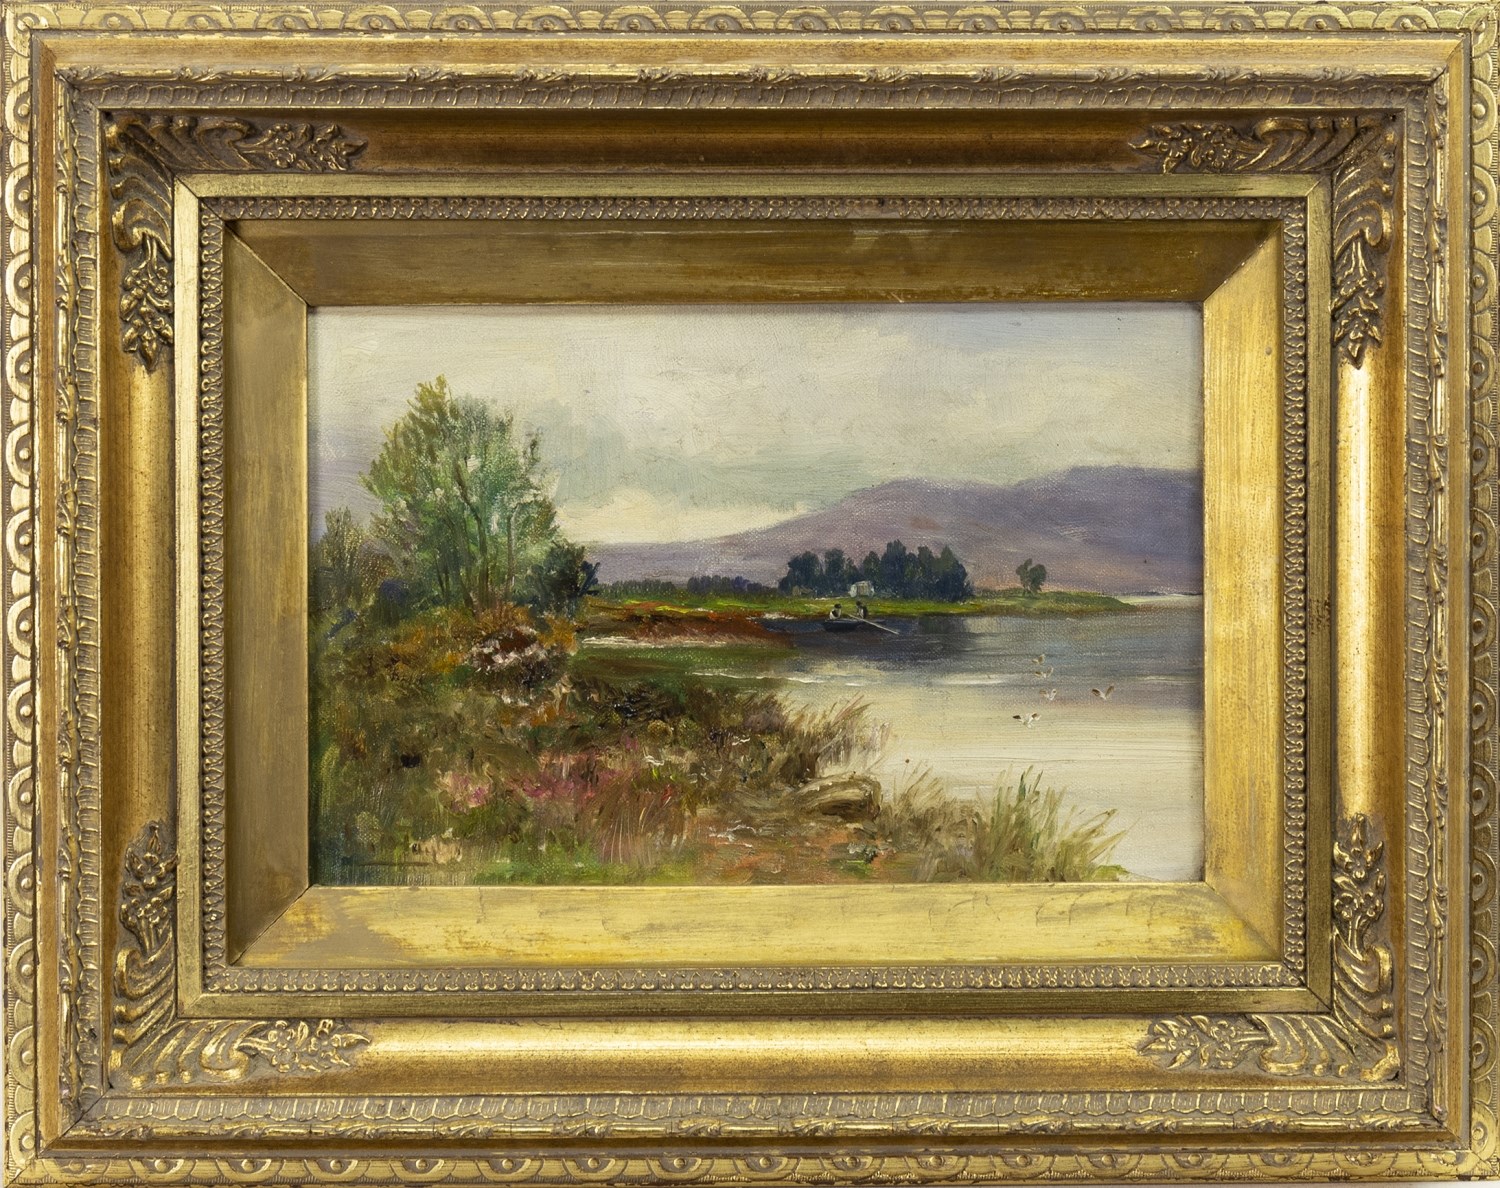 FISHING ON LOCH LEVEN, AN OIL ON CANVAS BY JOHN D TAYLOR